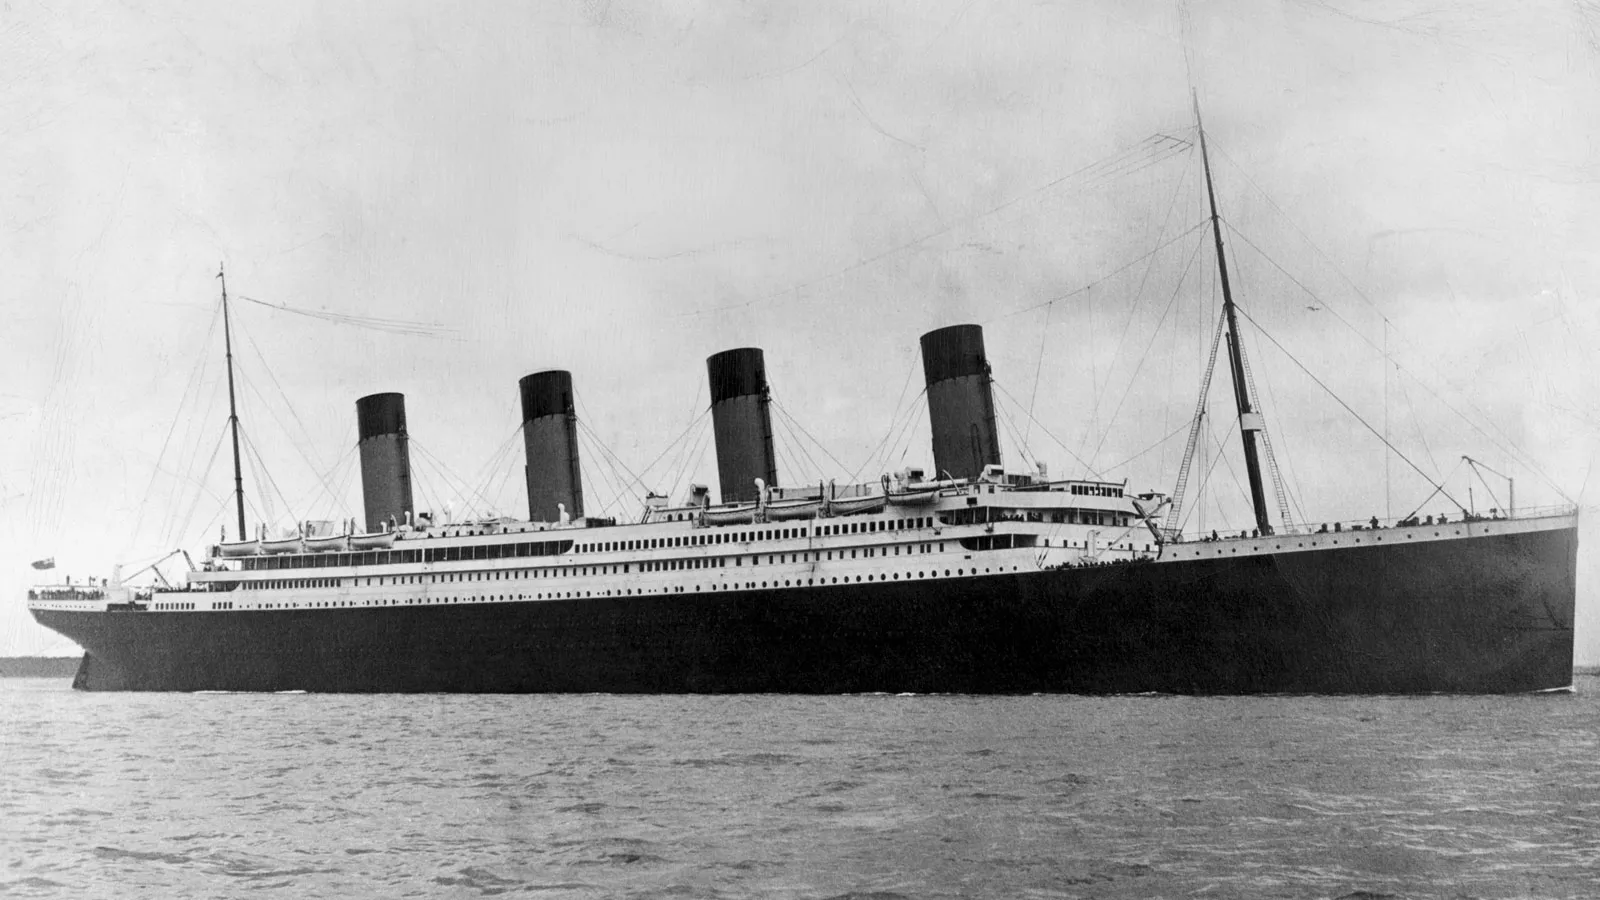 black and white photo of the Titanic sailing on open waters